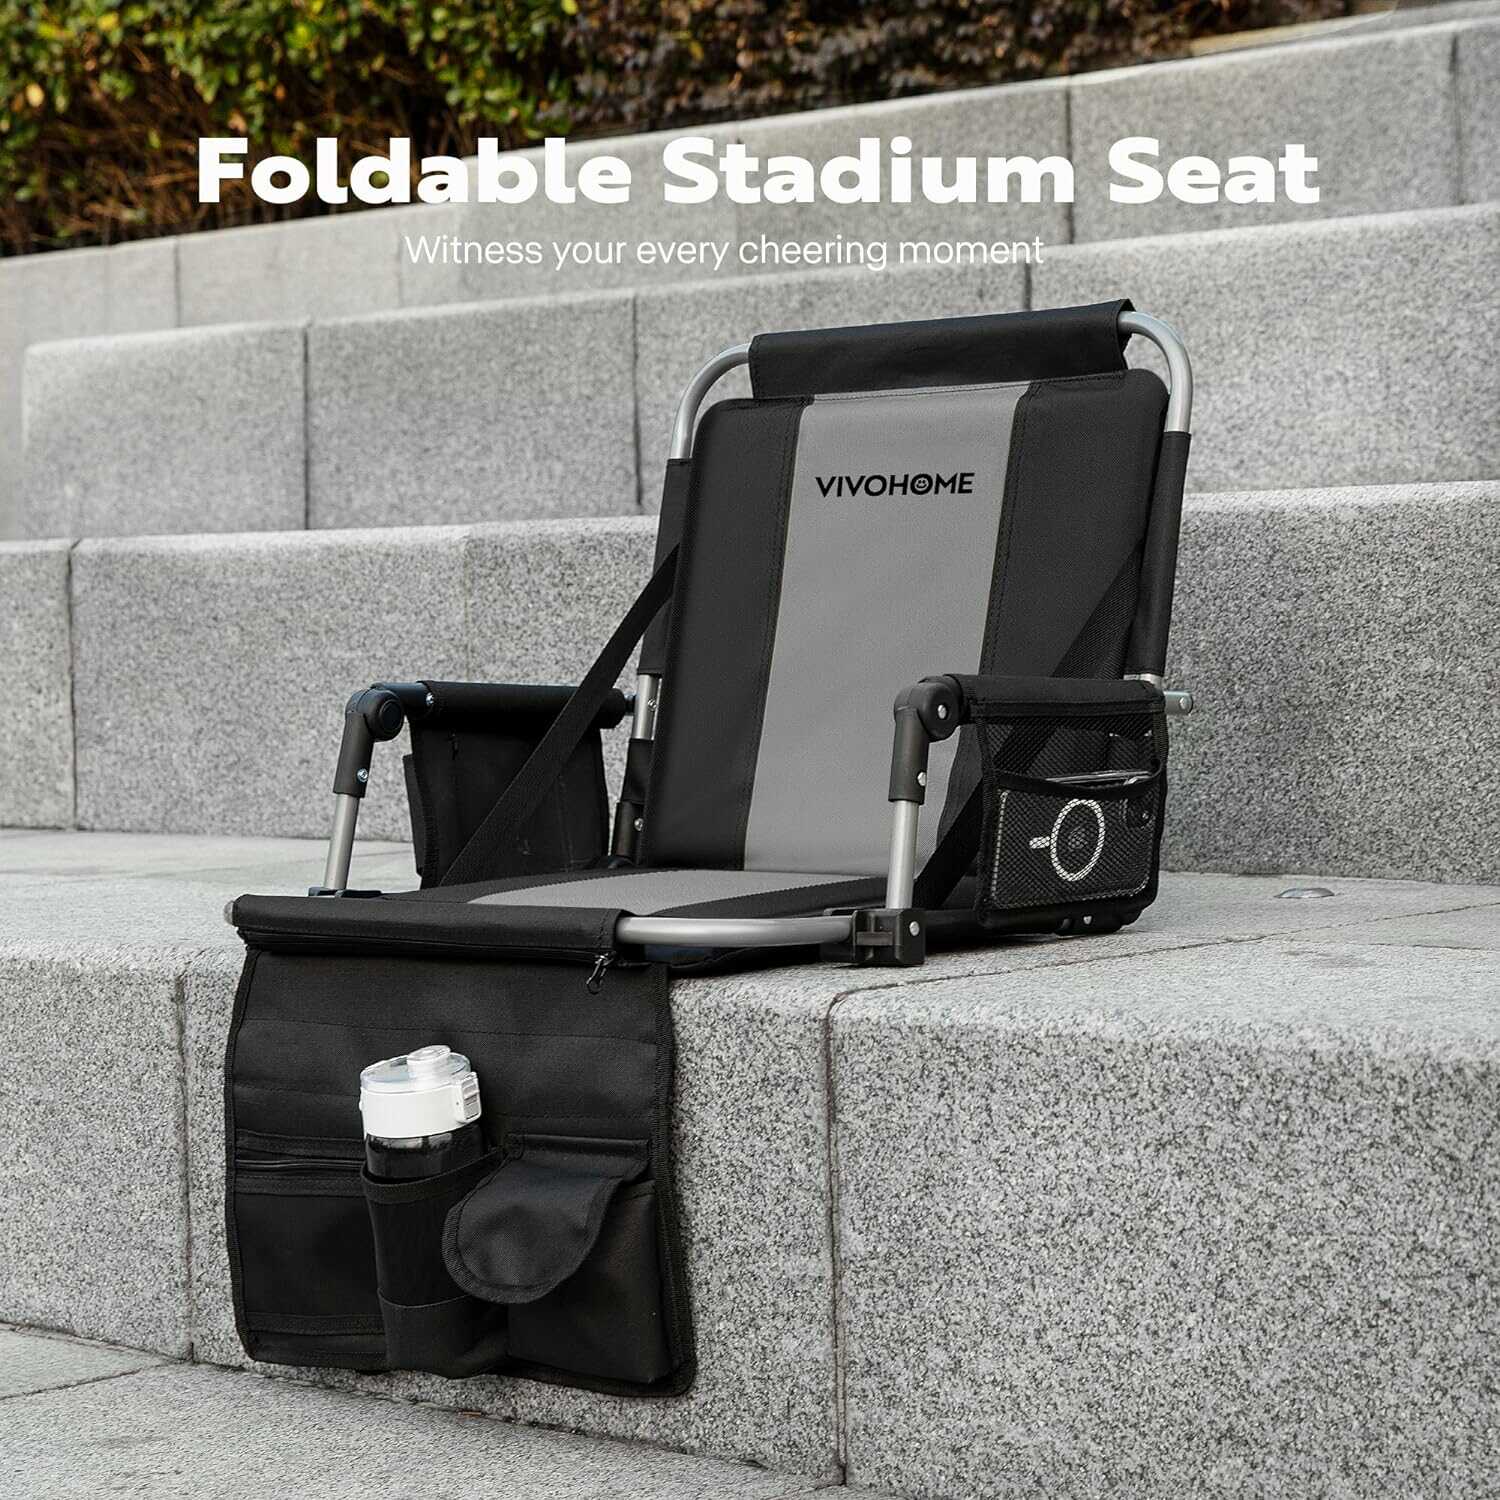 VIVOHOME Stadium Seats with Back Support Cushion for Bleachers 2Packs  "